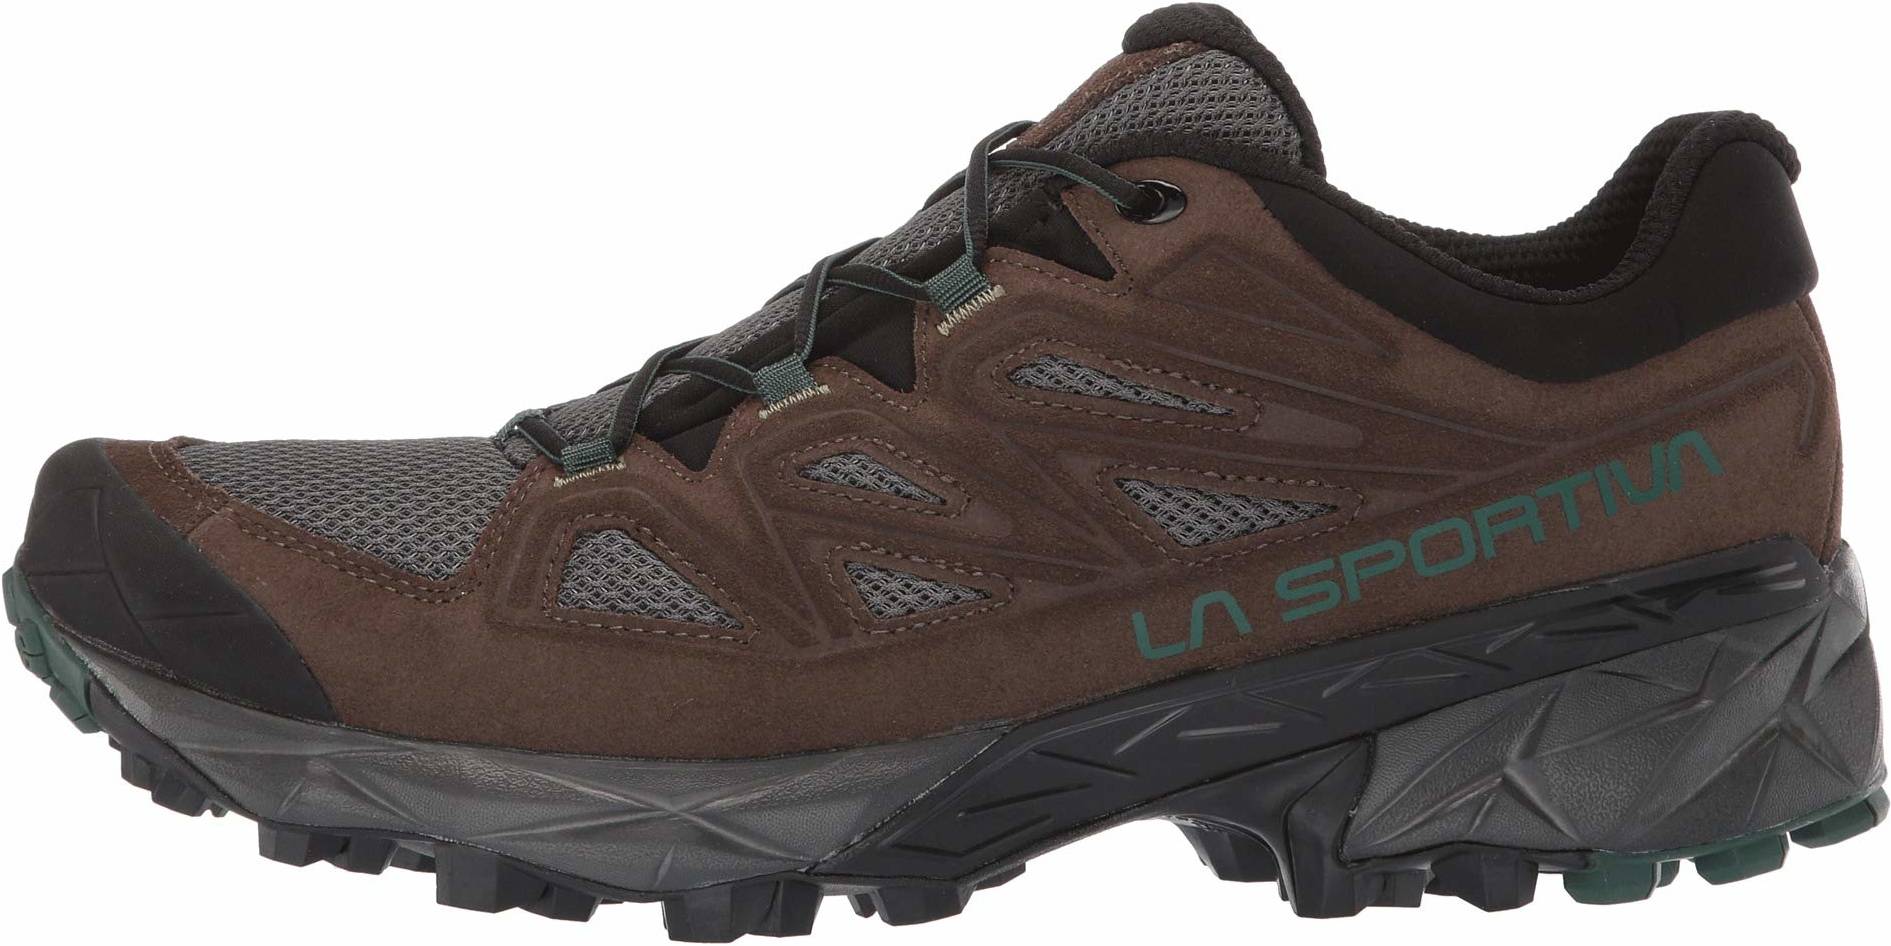 best rated hiking shoe